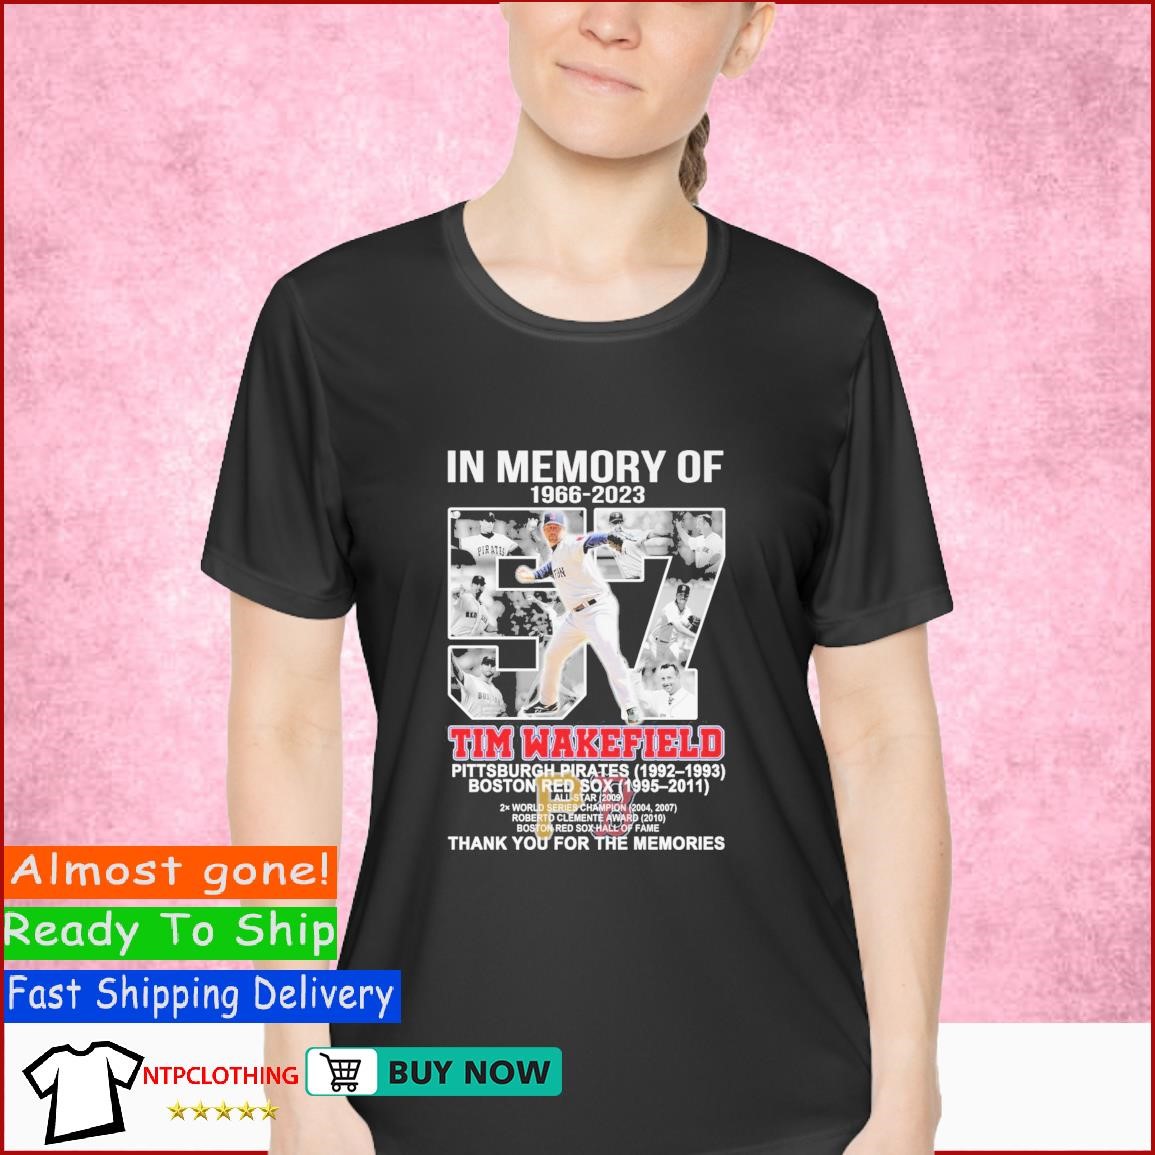 In memory of 1966 2023 tim wakefield Pittsburgh pirates 1992 1993 Boston  red sox 1995 2011 thank you for the memories shirt, hoodie, sweater, long  sleeve and tank top